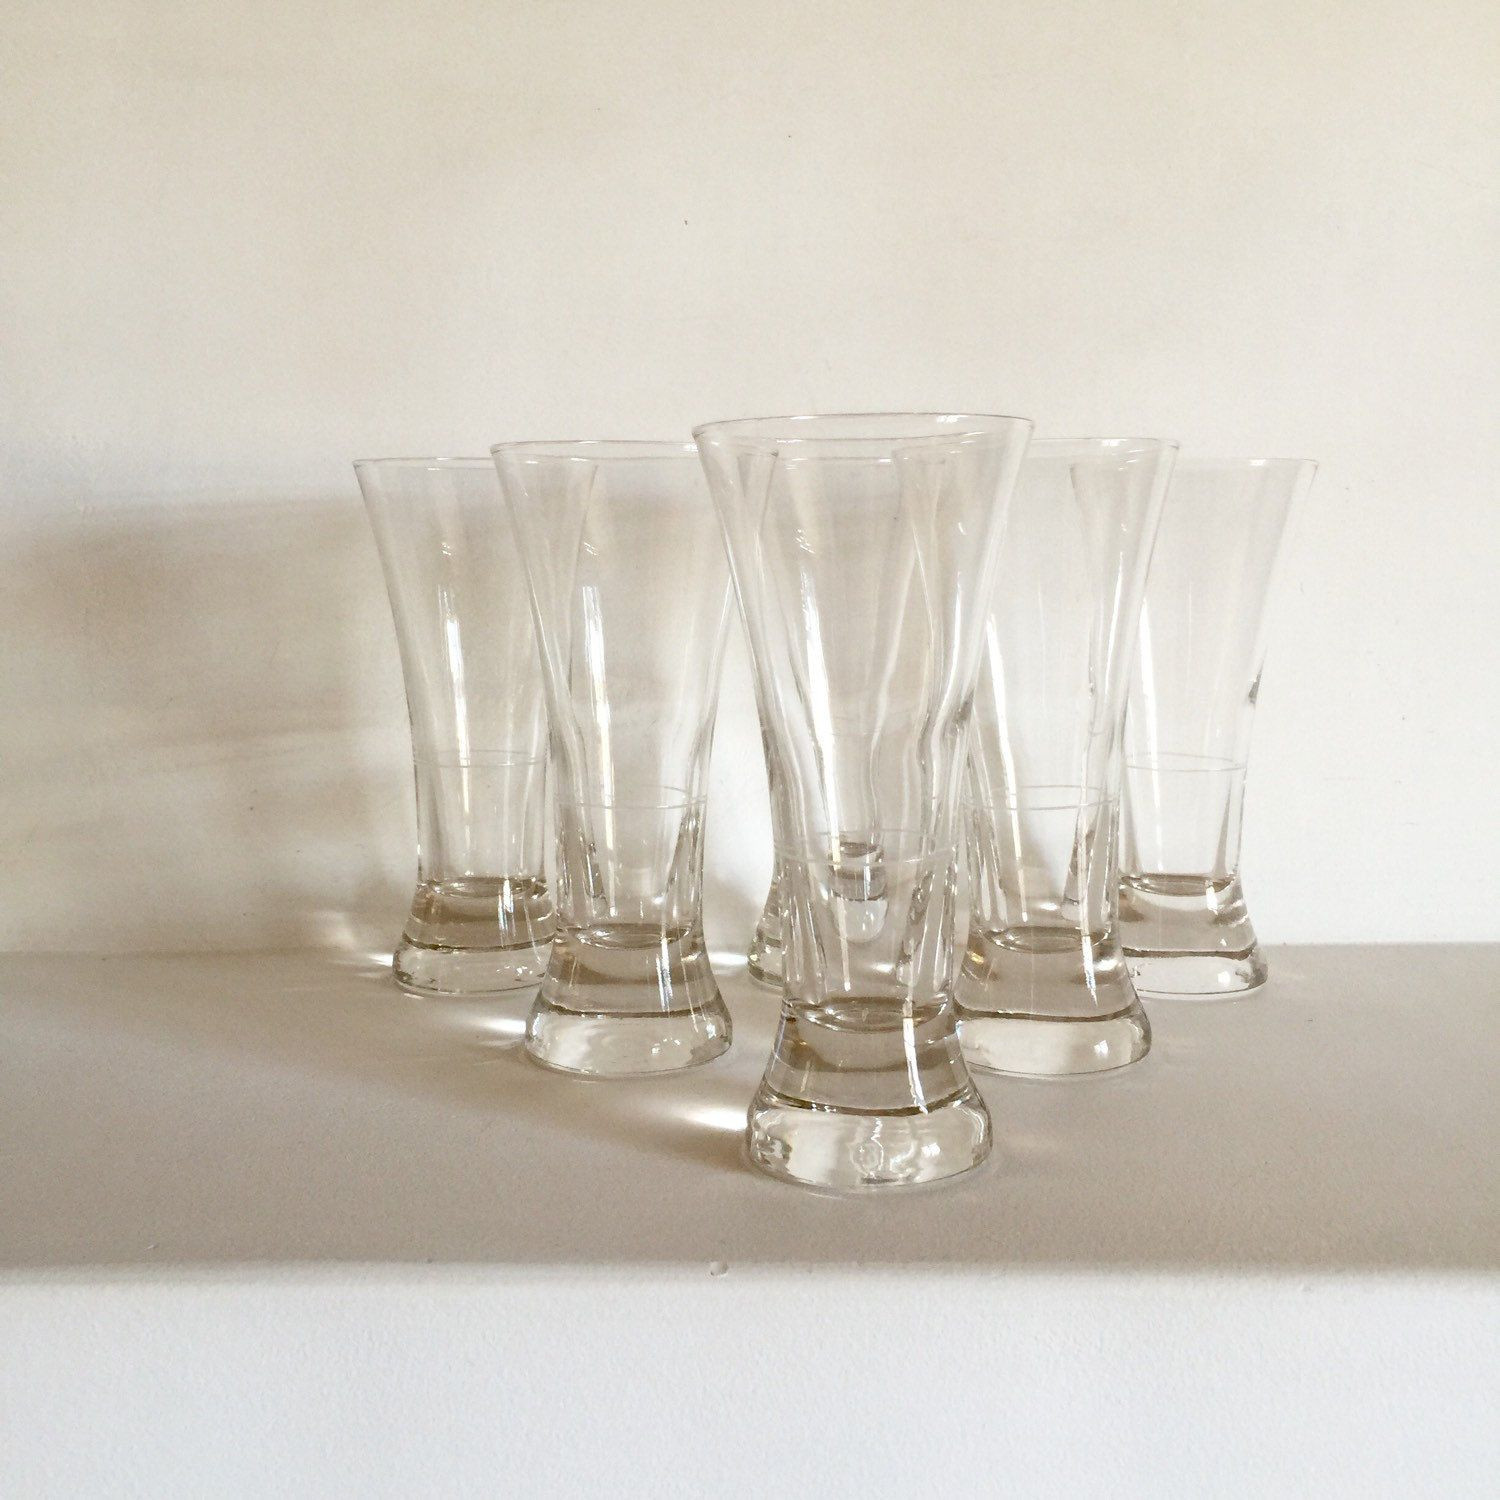 13 Stunning 6 X 6 Glass Cube Vases 2024 free download 6 x 6 glass cube vases of french vintage pastis glasses aperitif glasses set of 6 glasses within french vintage pastis glasses aperitif glasses set of 6 glasses french barware by